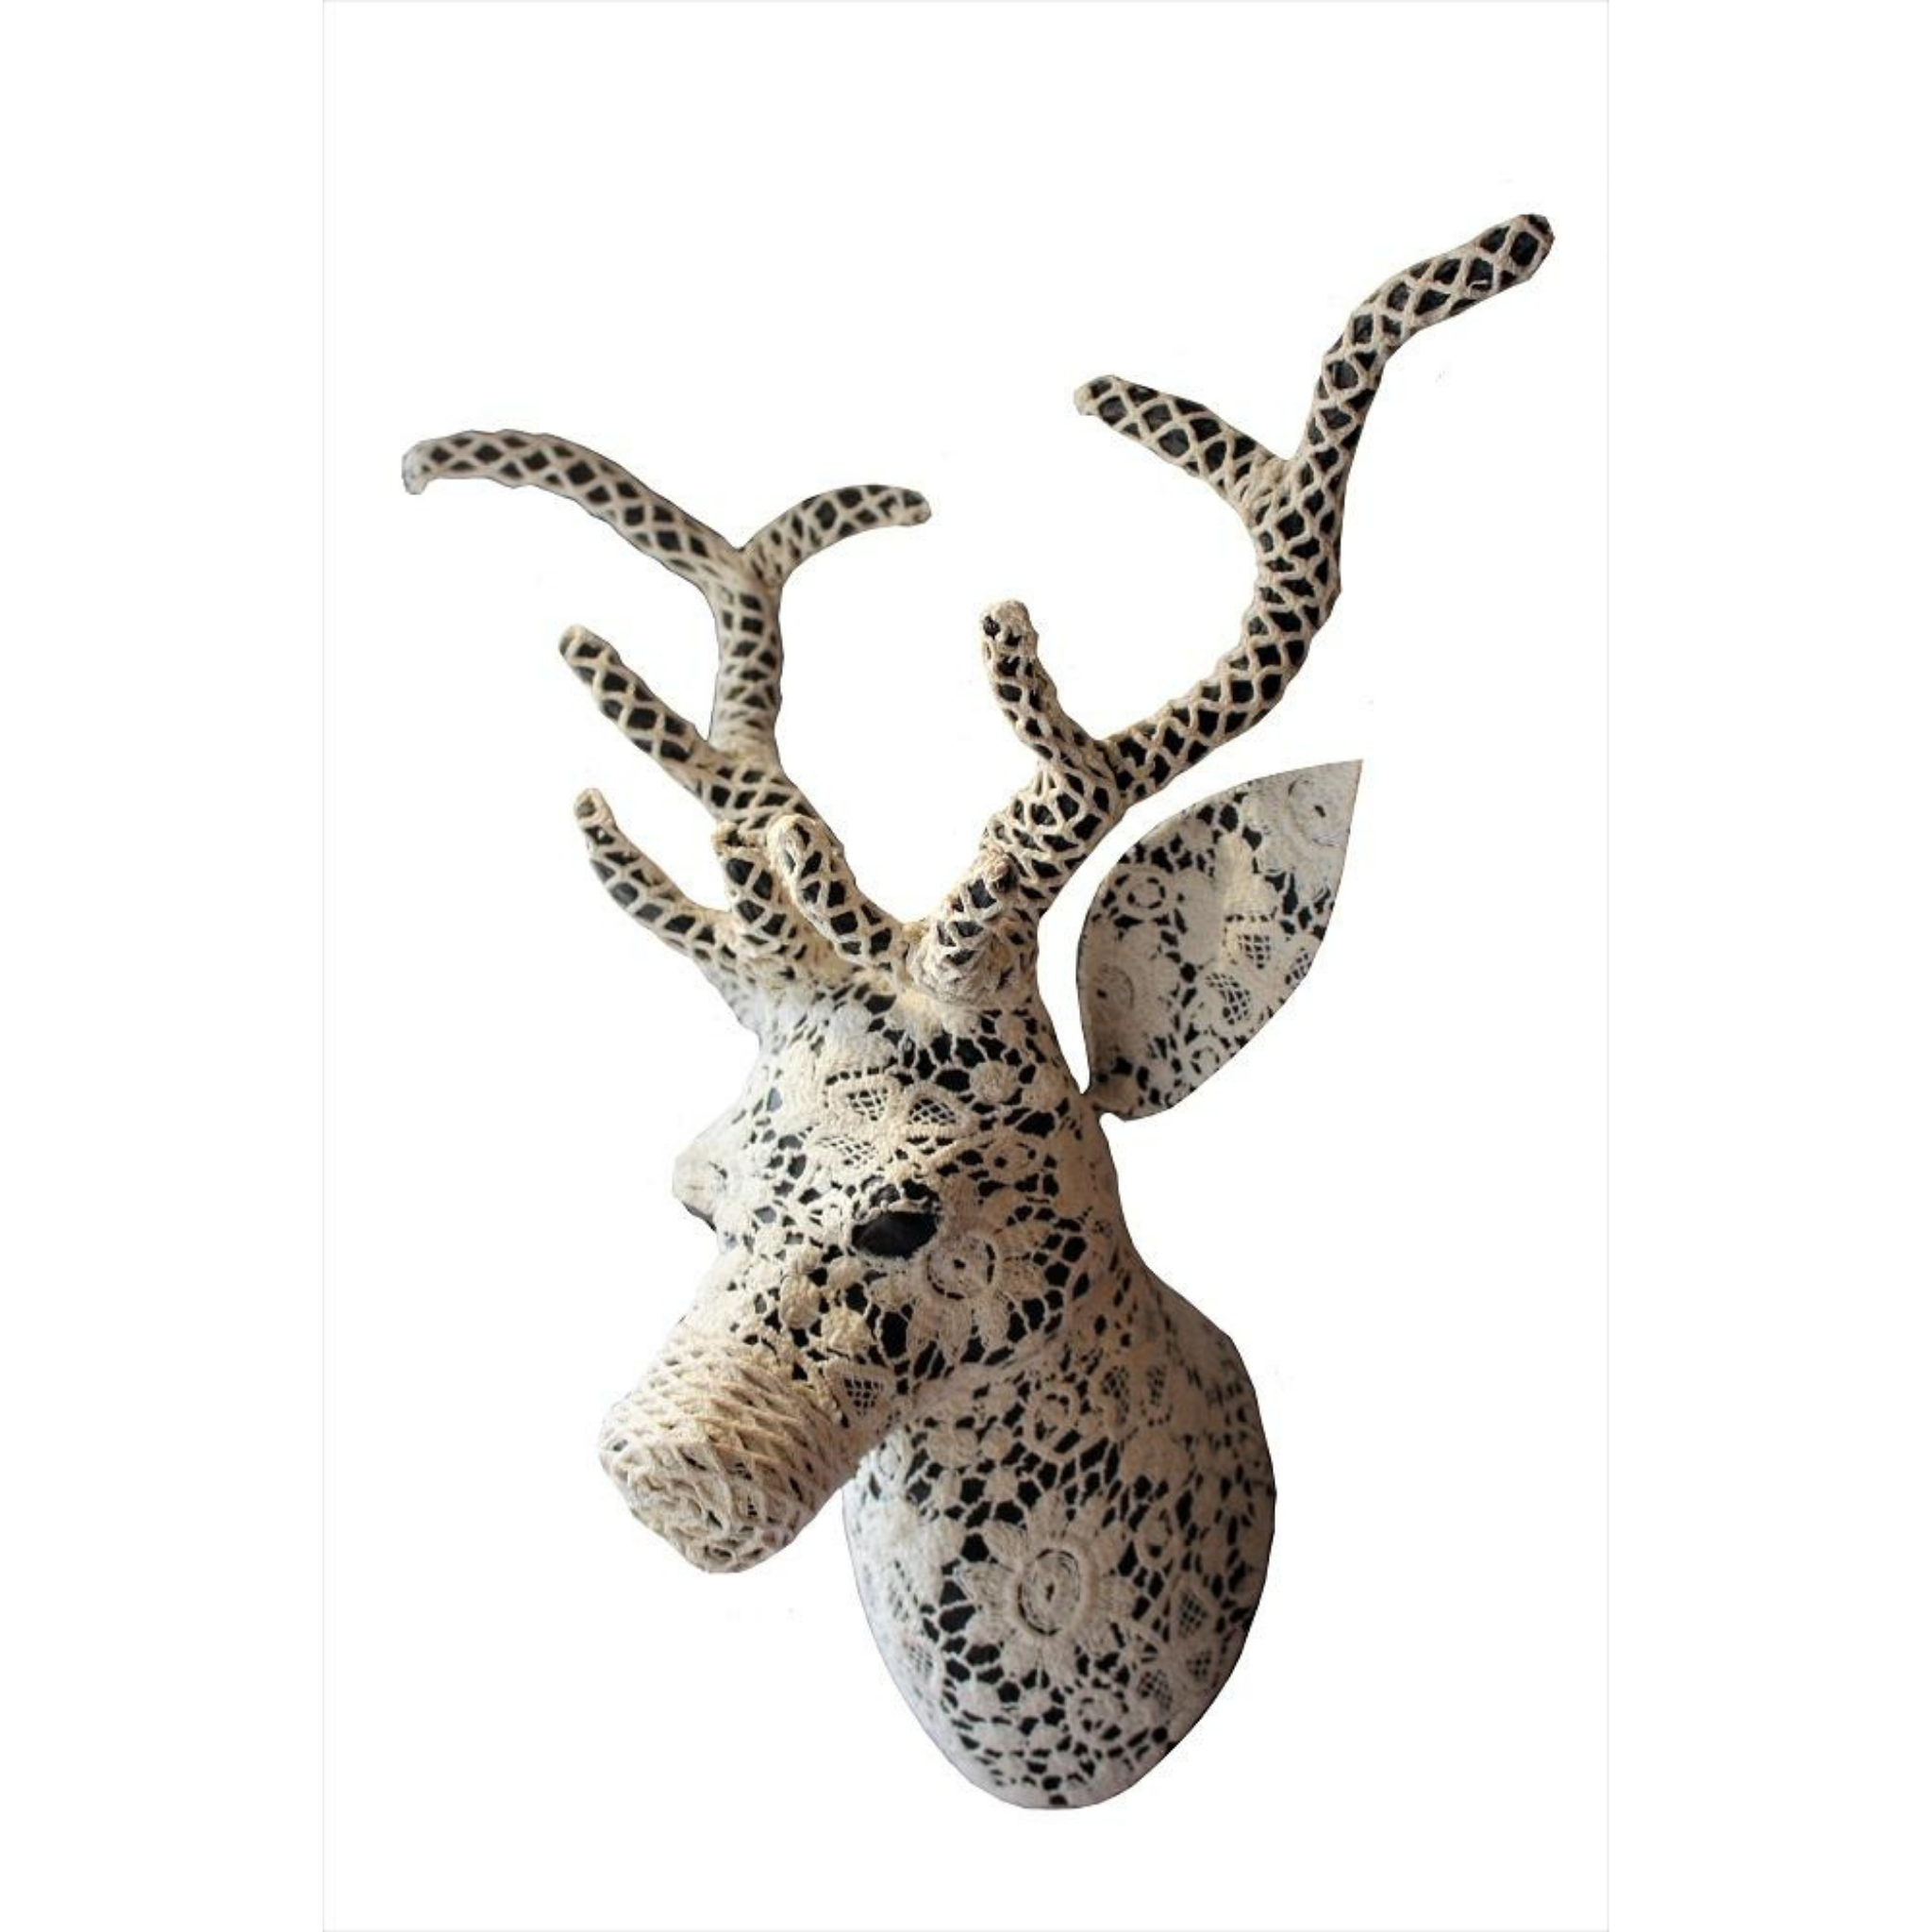 Reindeer Paper Mache Covered in Lace Side View